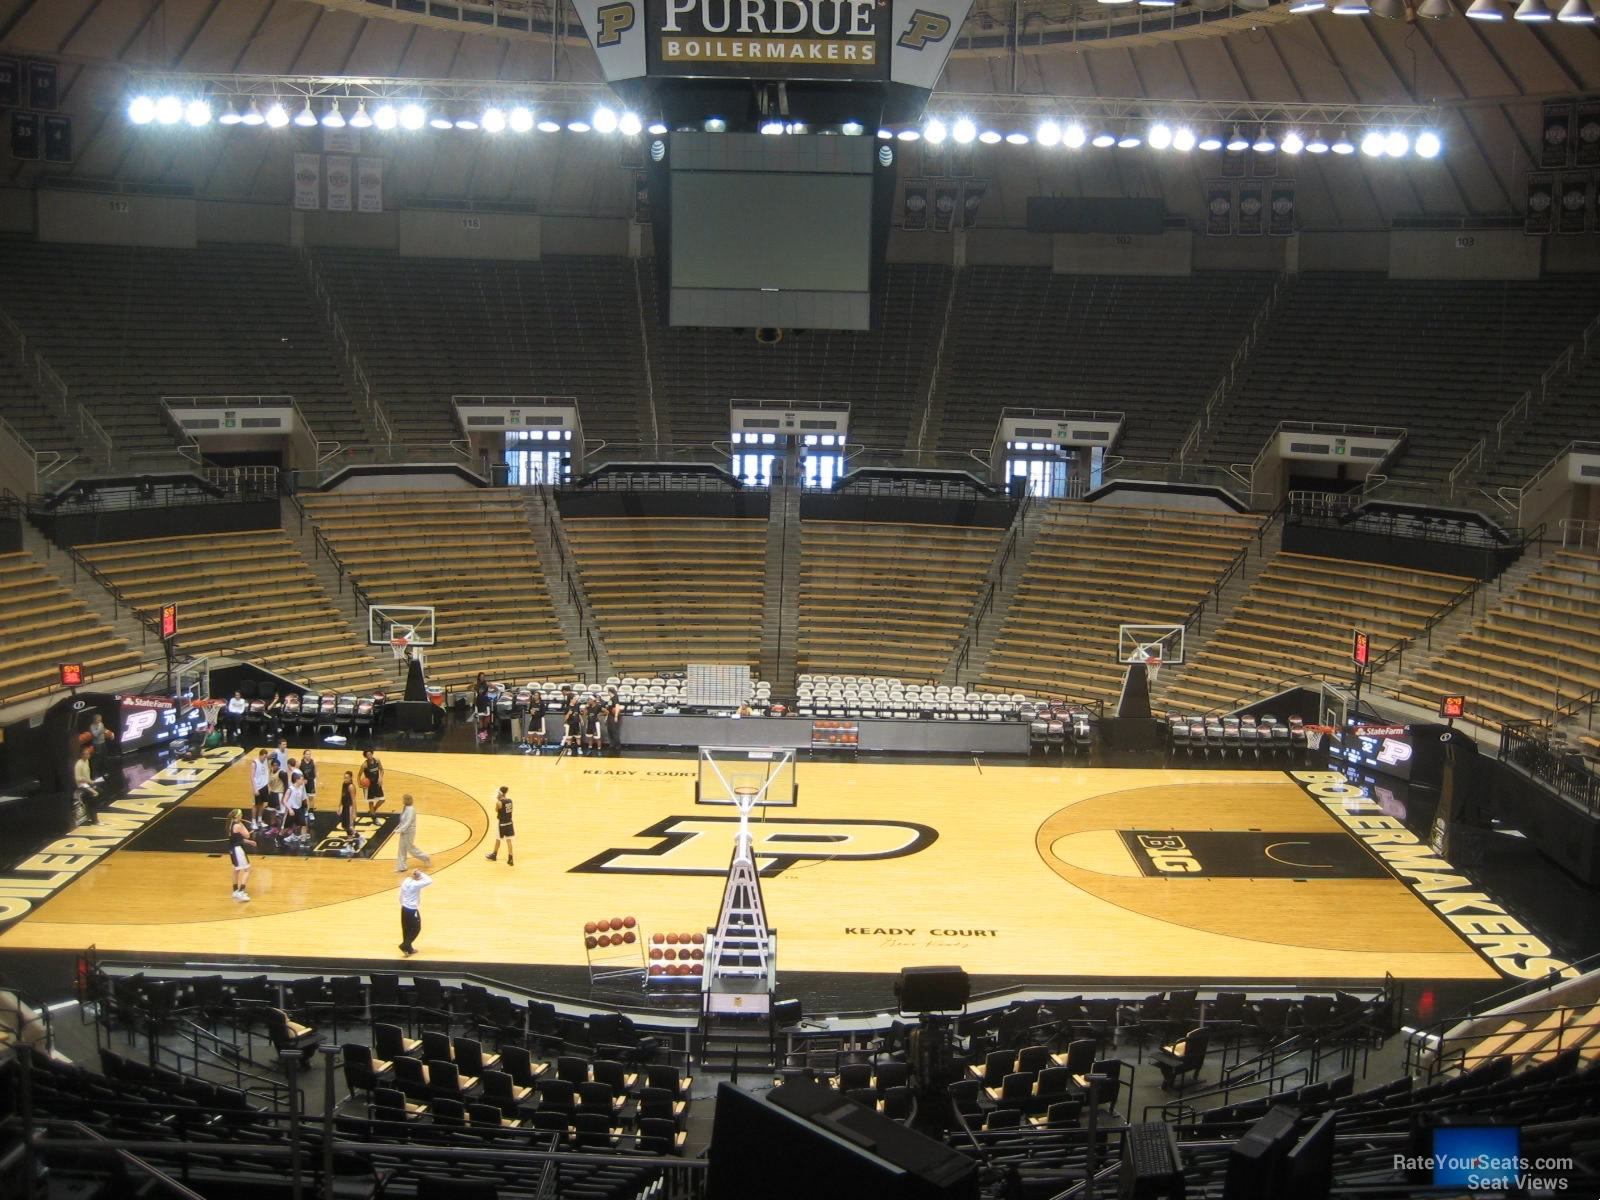 section 111, row 10 seat view  - mackey arena